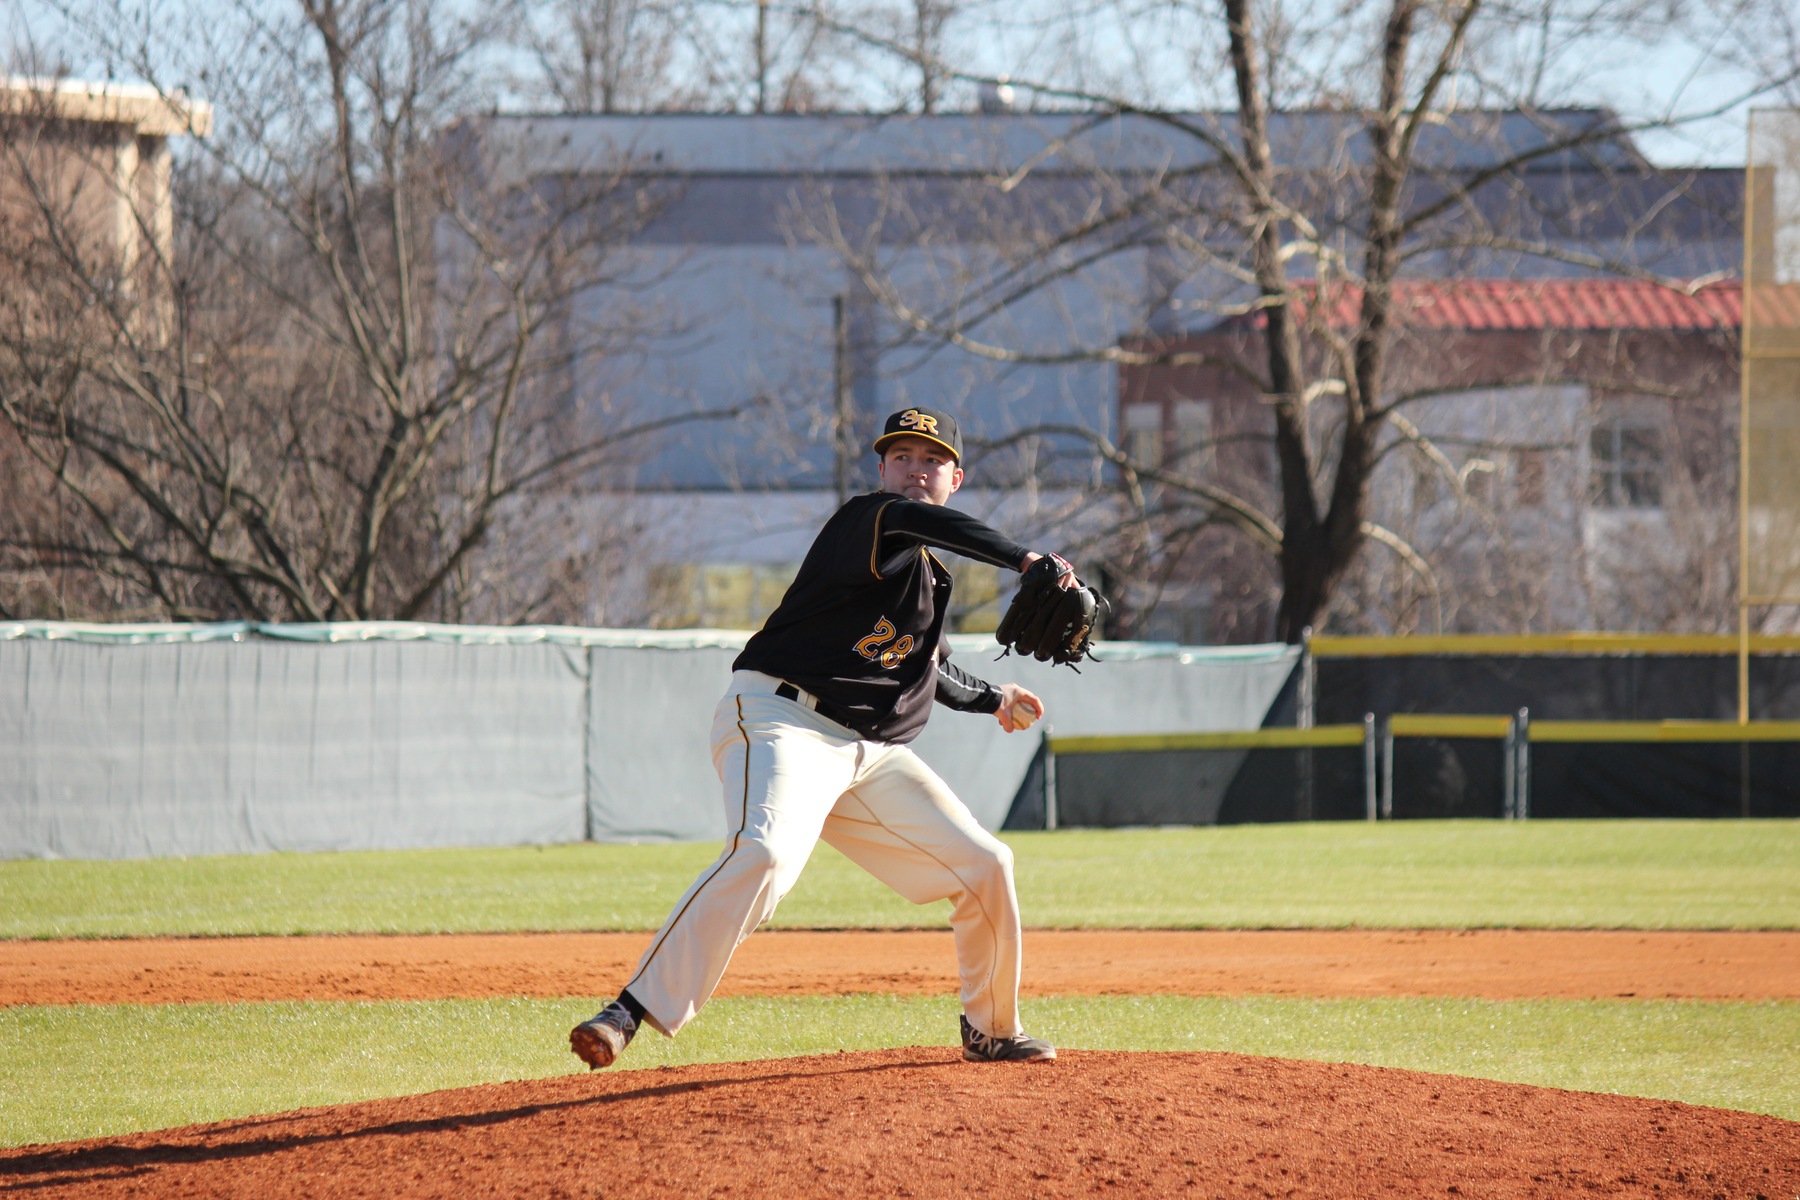 Extra-inning victory lifts Raiders to sweep